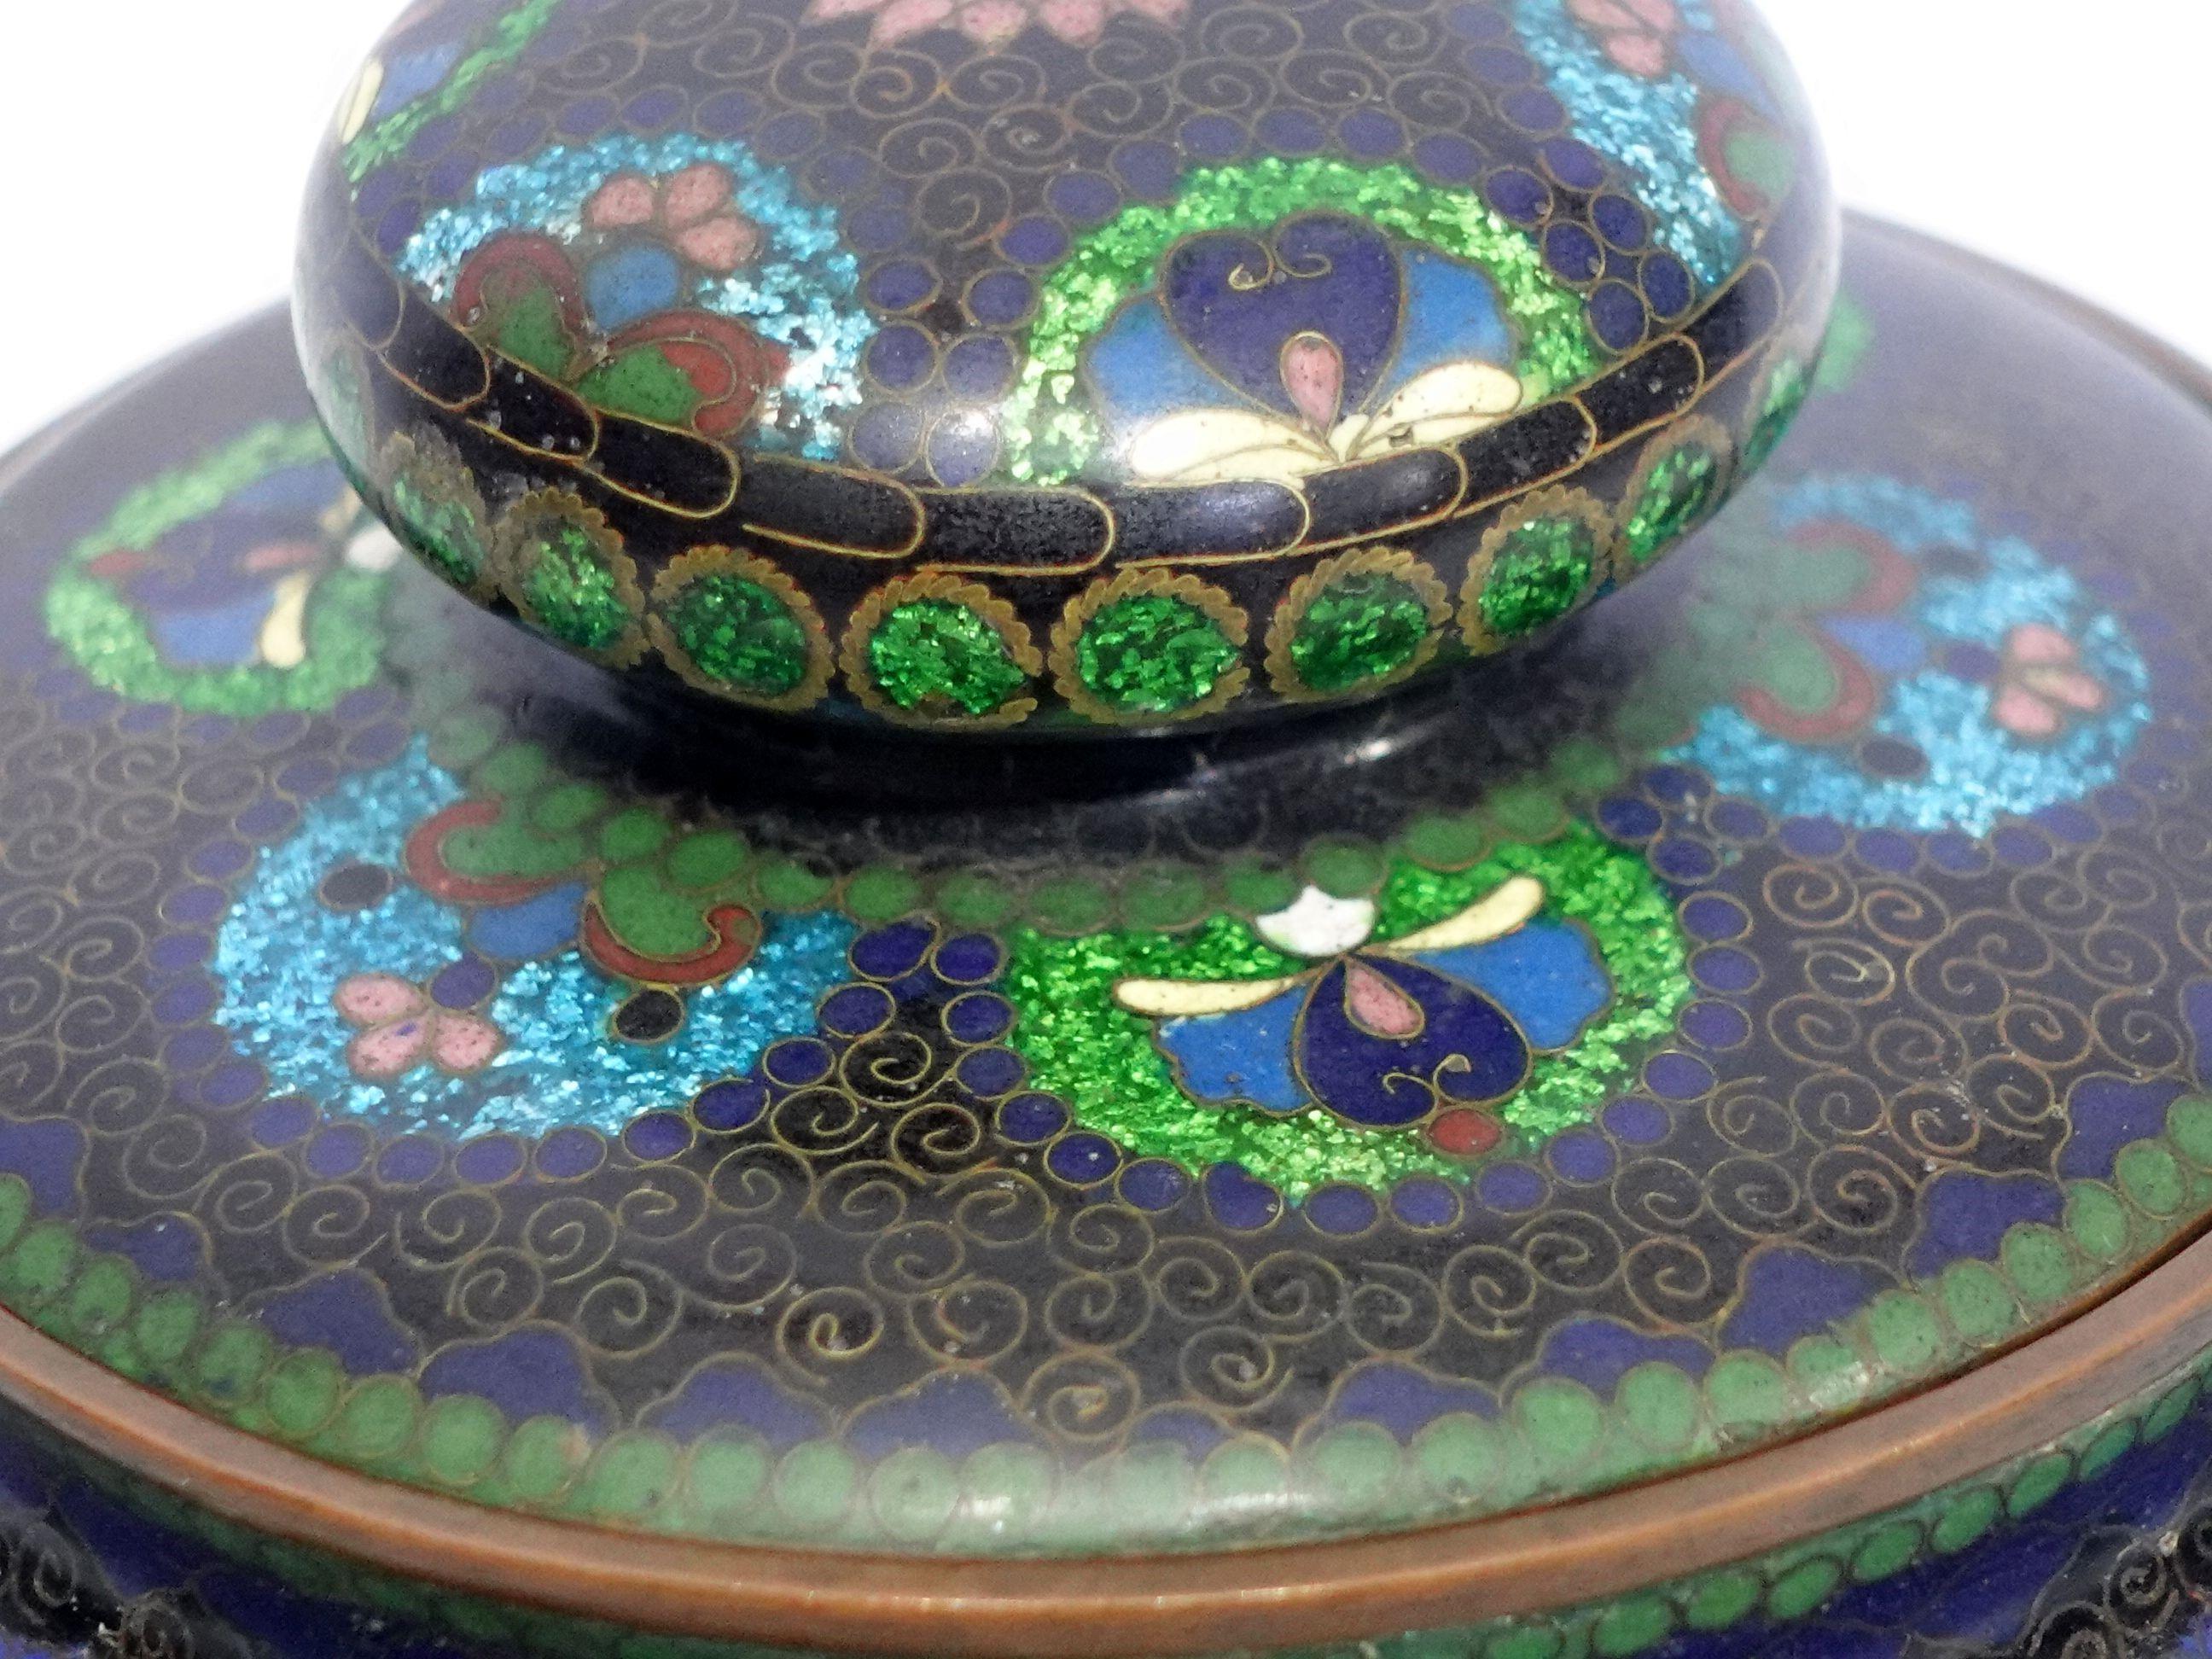 Antique Japanese Cloisonné Enamel Round Lidded Box 19th Century CO#07 In Good Condition For Sale In Norton, MA